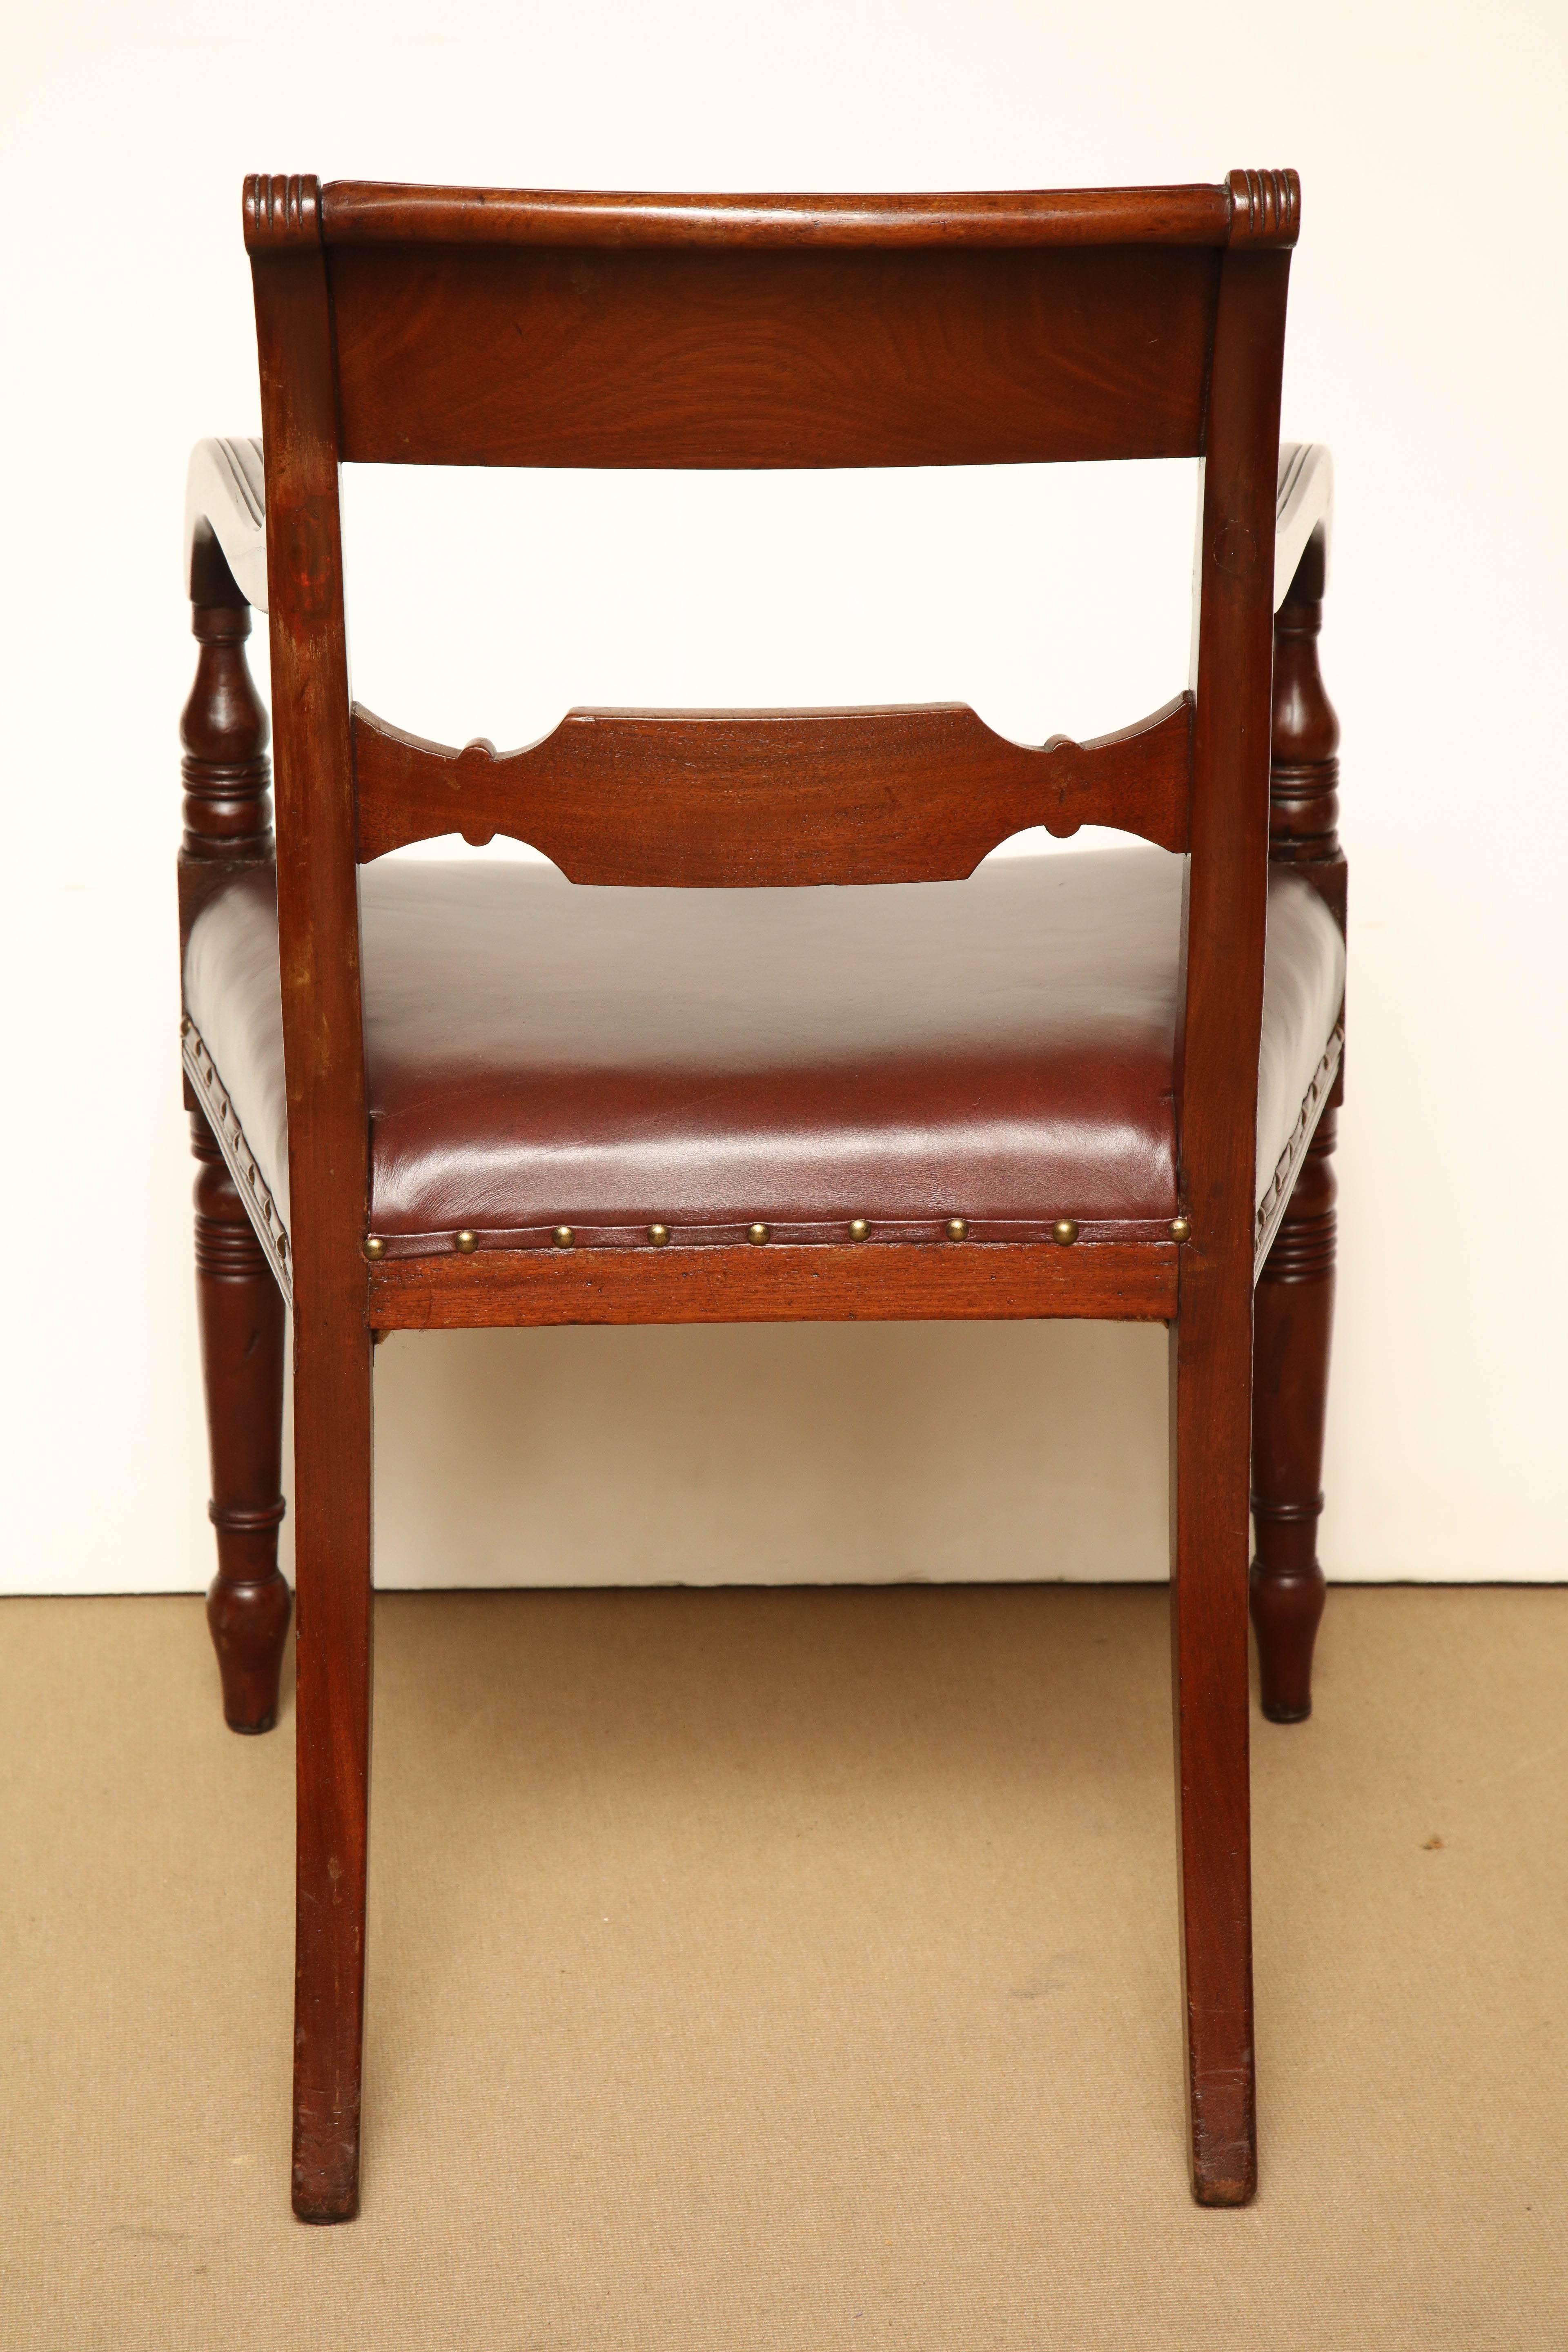 Early 19th Century English Regency, Mahogany and Brass Inlay Desk Chair For Sale 5